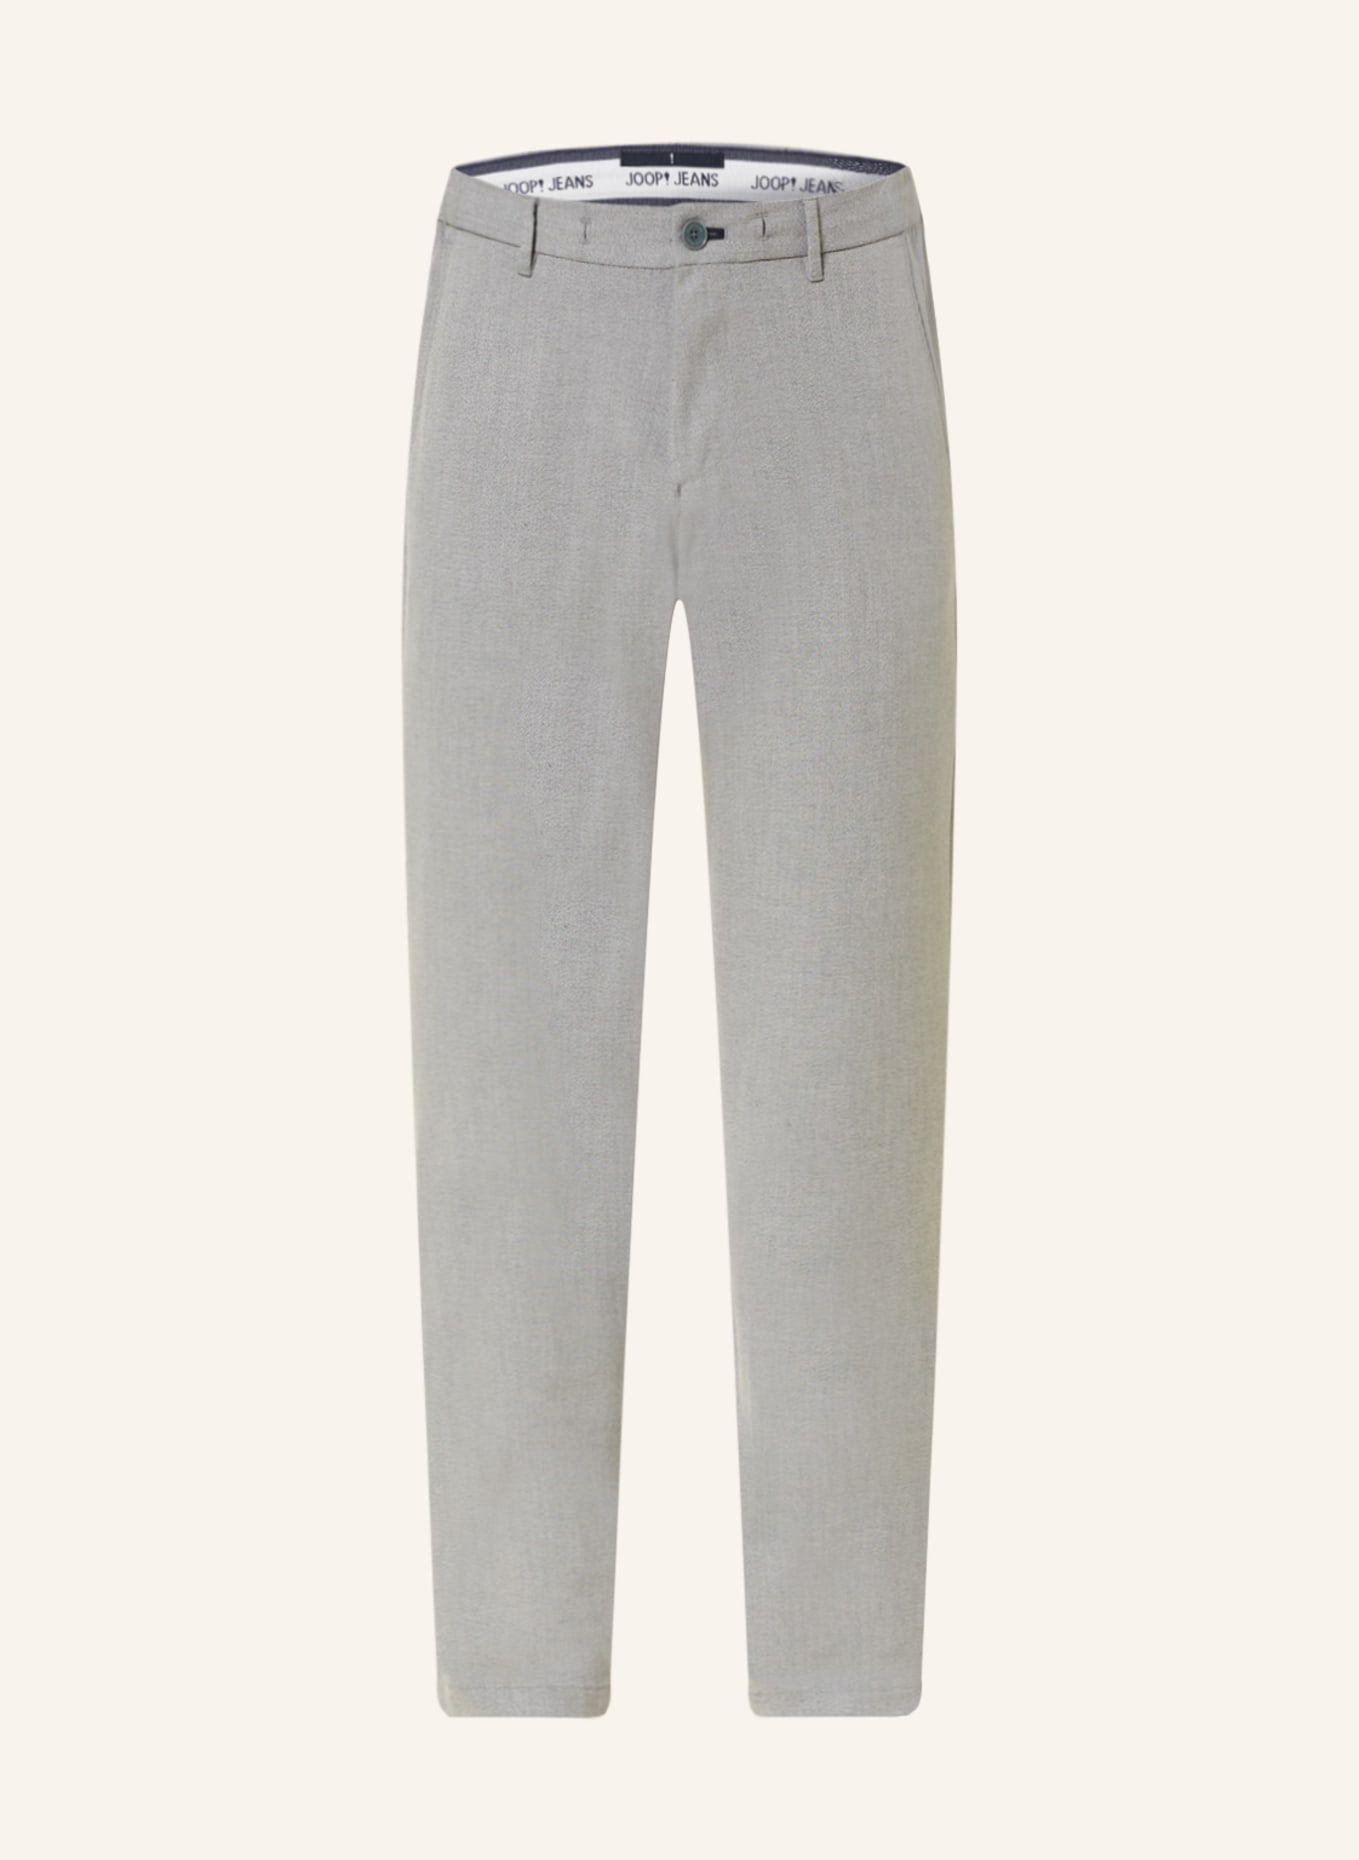 JOOP! JEANS Trousers MAXTON in jogger style modern fit , Color: GRAY(Image null)